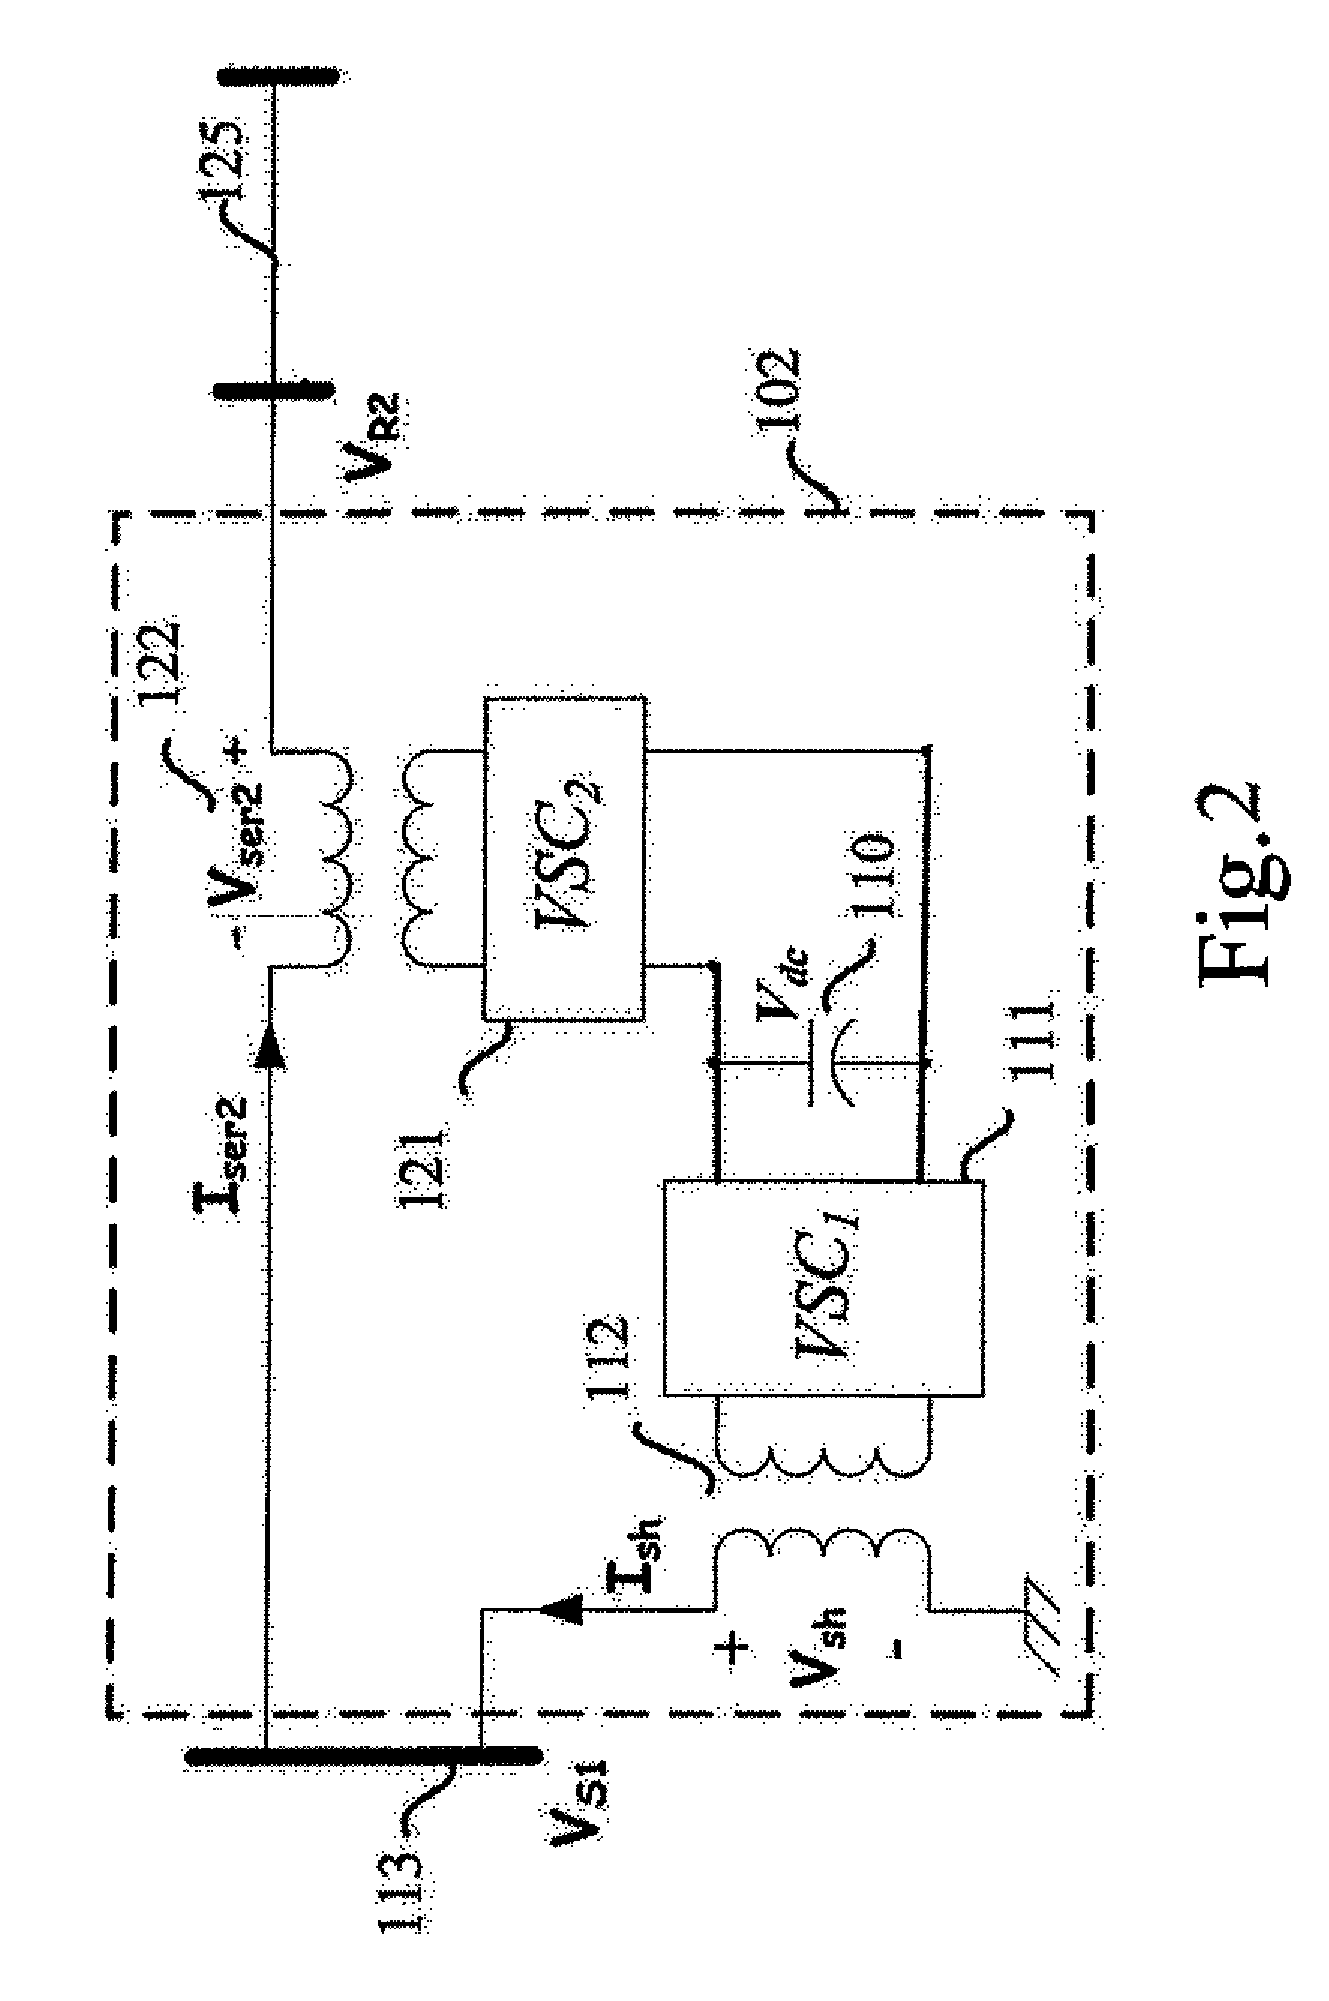 Method of calculating power flow solution of a power grid that includes generalized power flow controllers